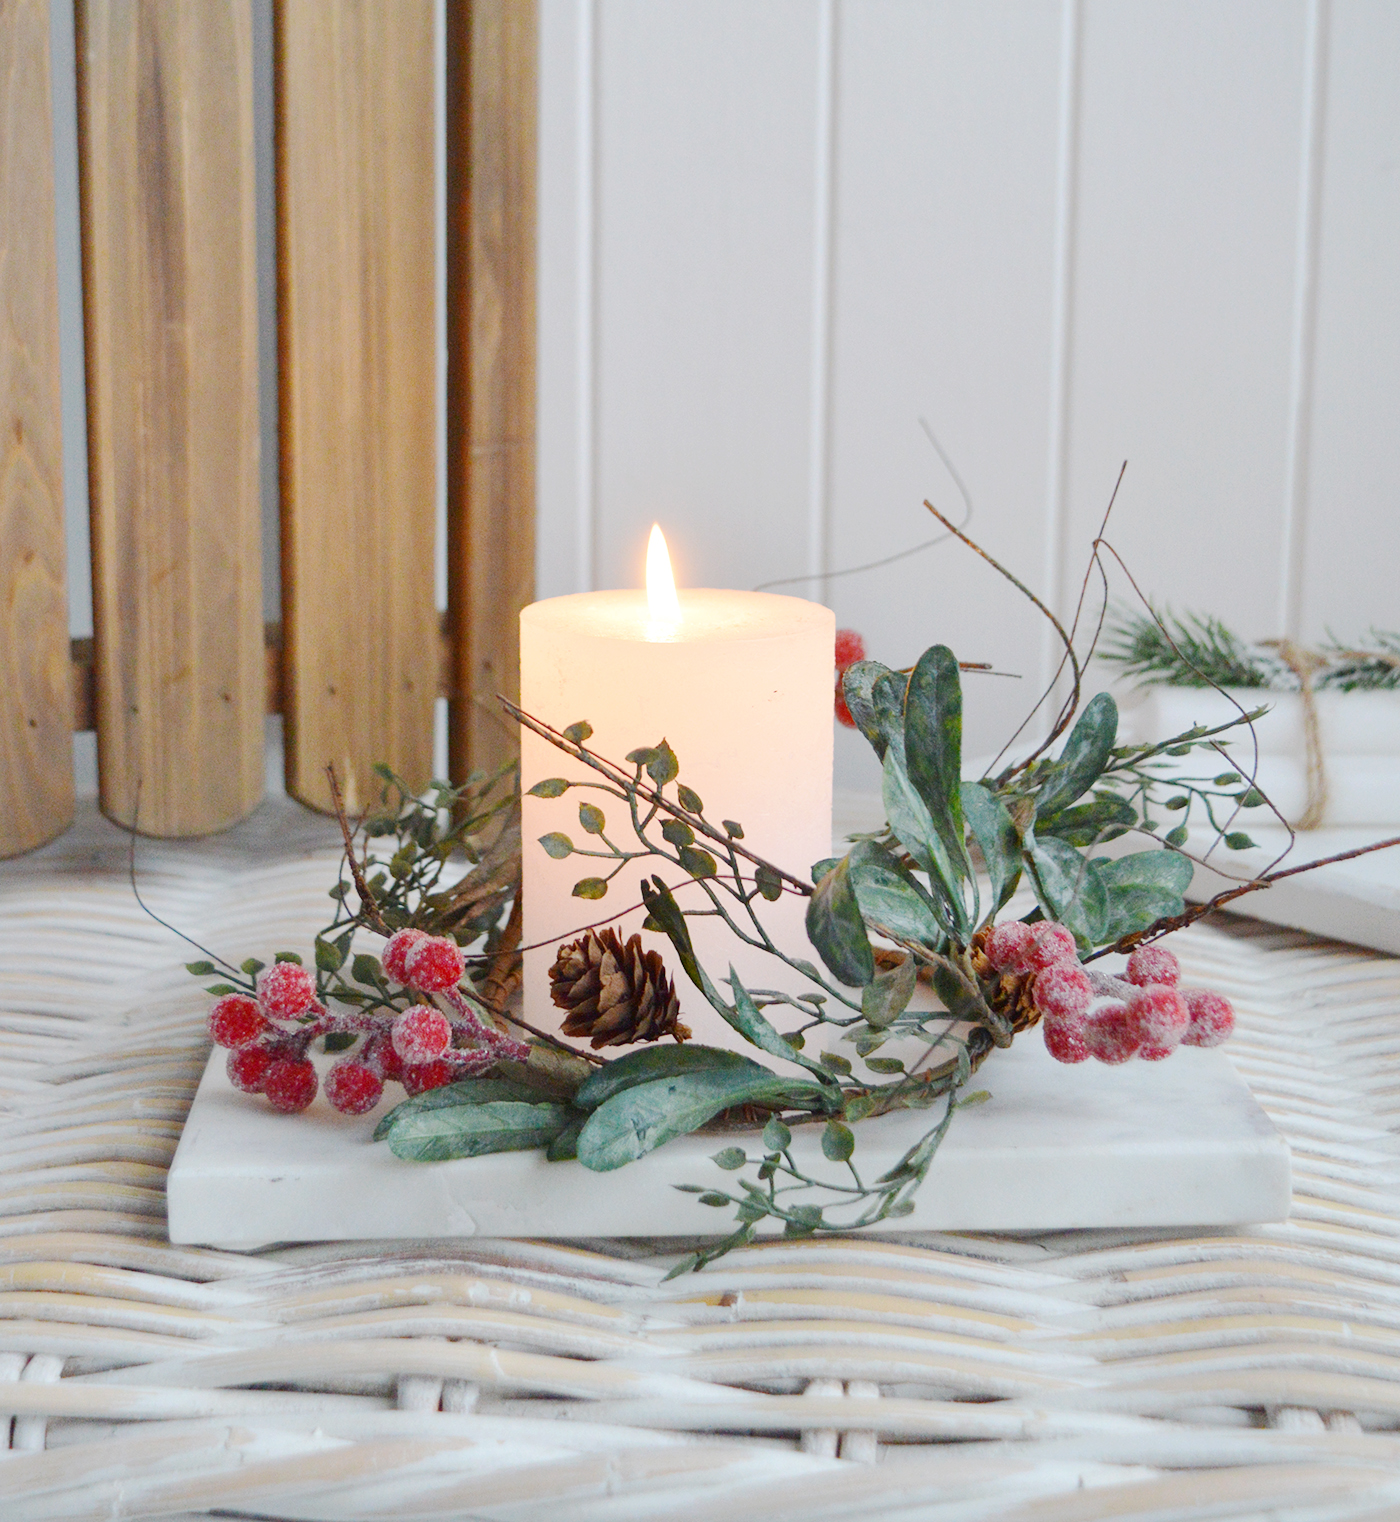 Create a beautiful centerpiece with this gorgeous winter candle ring with gently frosted leaves, little pinecones and contrasting red berries - Luxury Christmas table decoration from The White Lighhtouse New England Stlye homes and interiors